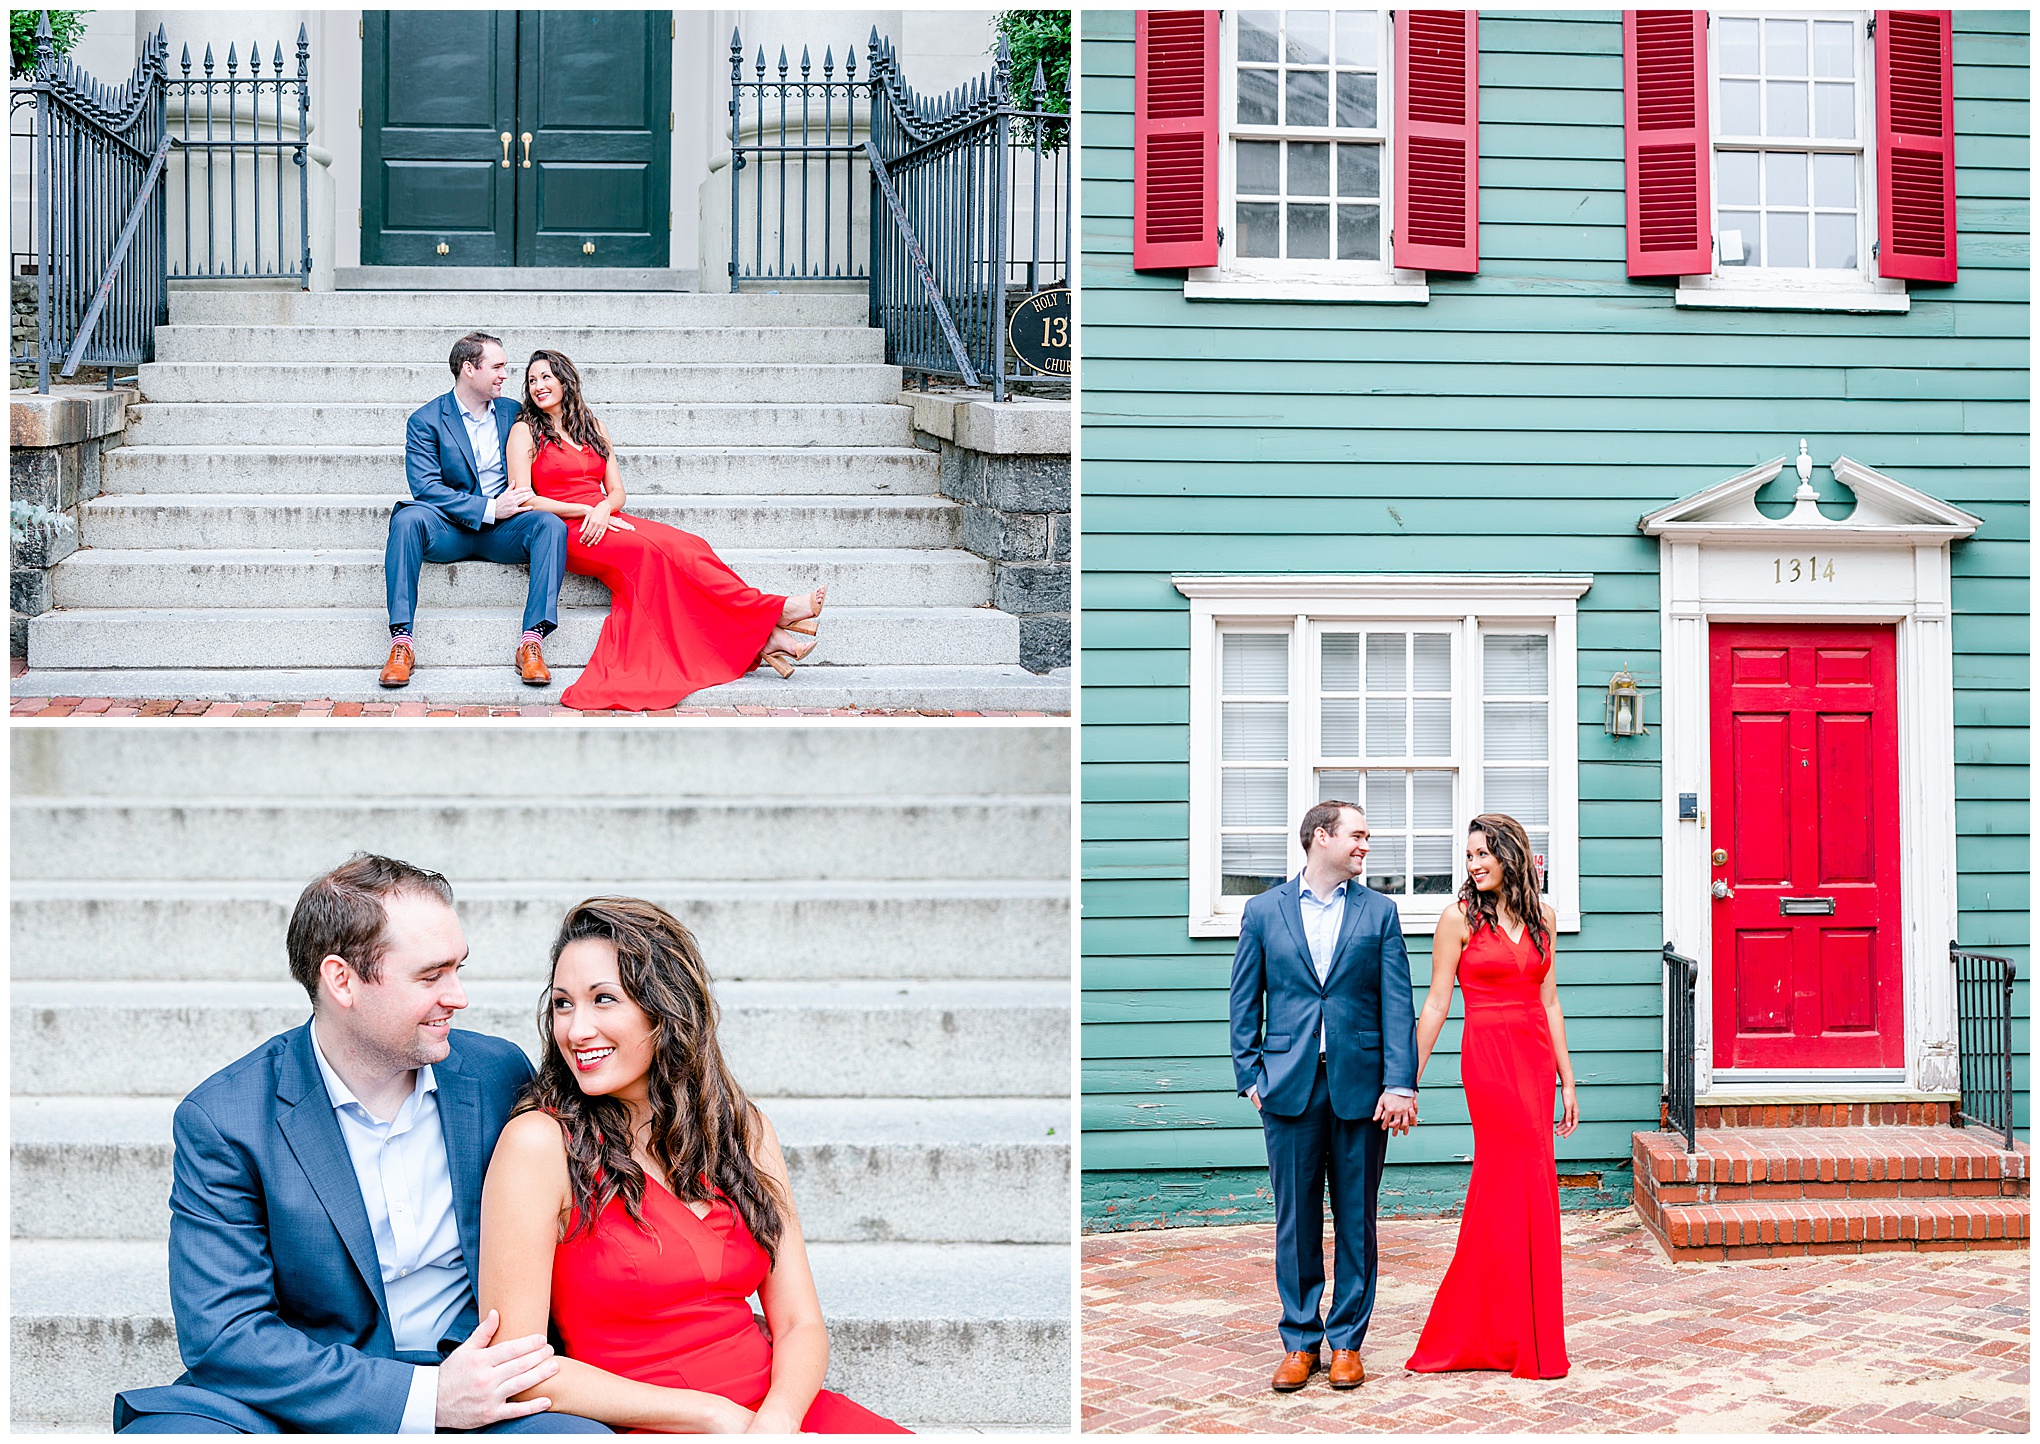 summer Georgetown engagement photos, DC engagement photos, classic engagement photos, summer engagement photos, summer engagement photo outfits, classic engagement photo outfits, Rachel E.H. Photography, DC wedding photographer, DC engagement photographer, DC proposal photographer, DC photographer, red white and blue aesthetic, red gown